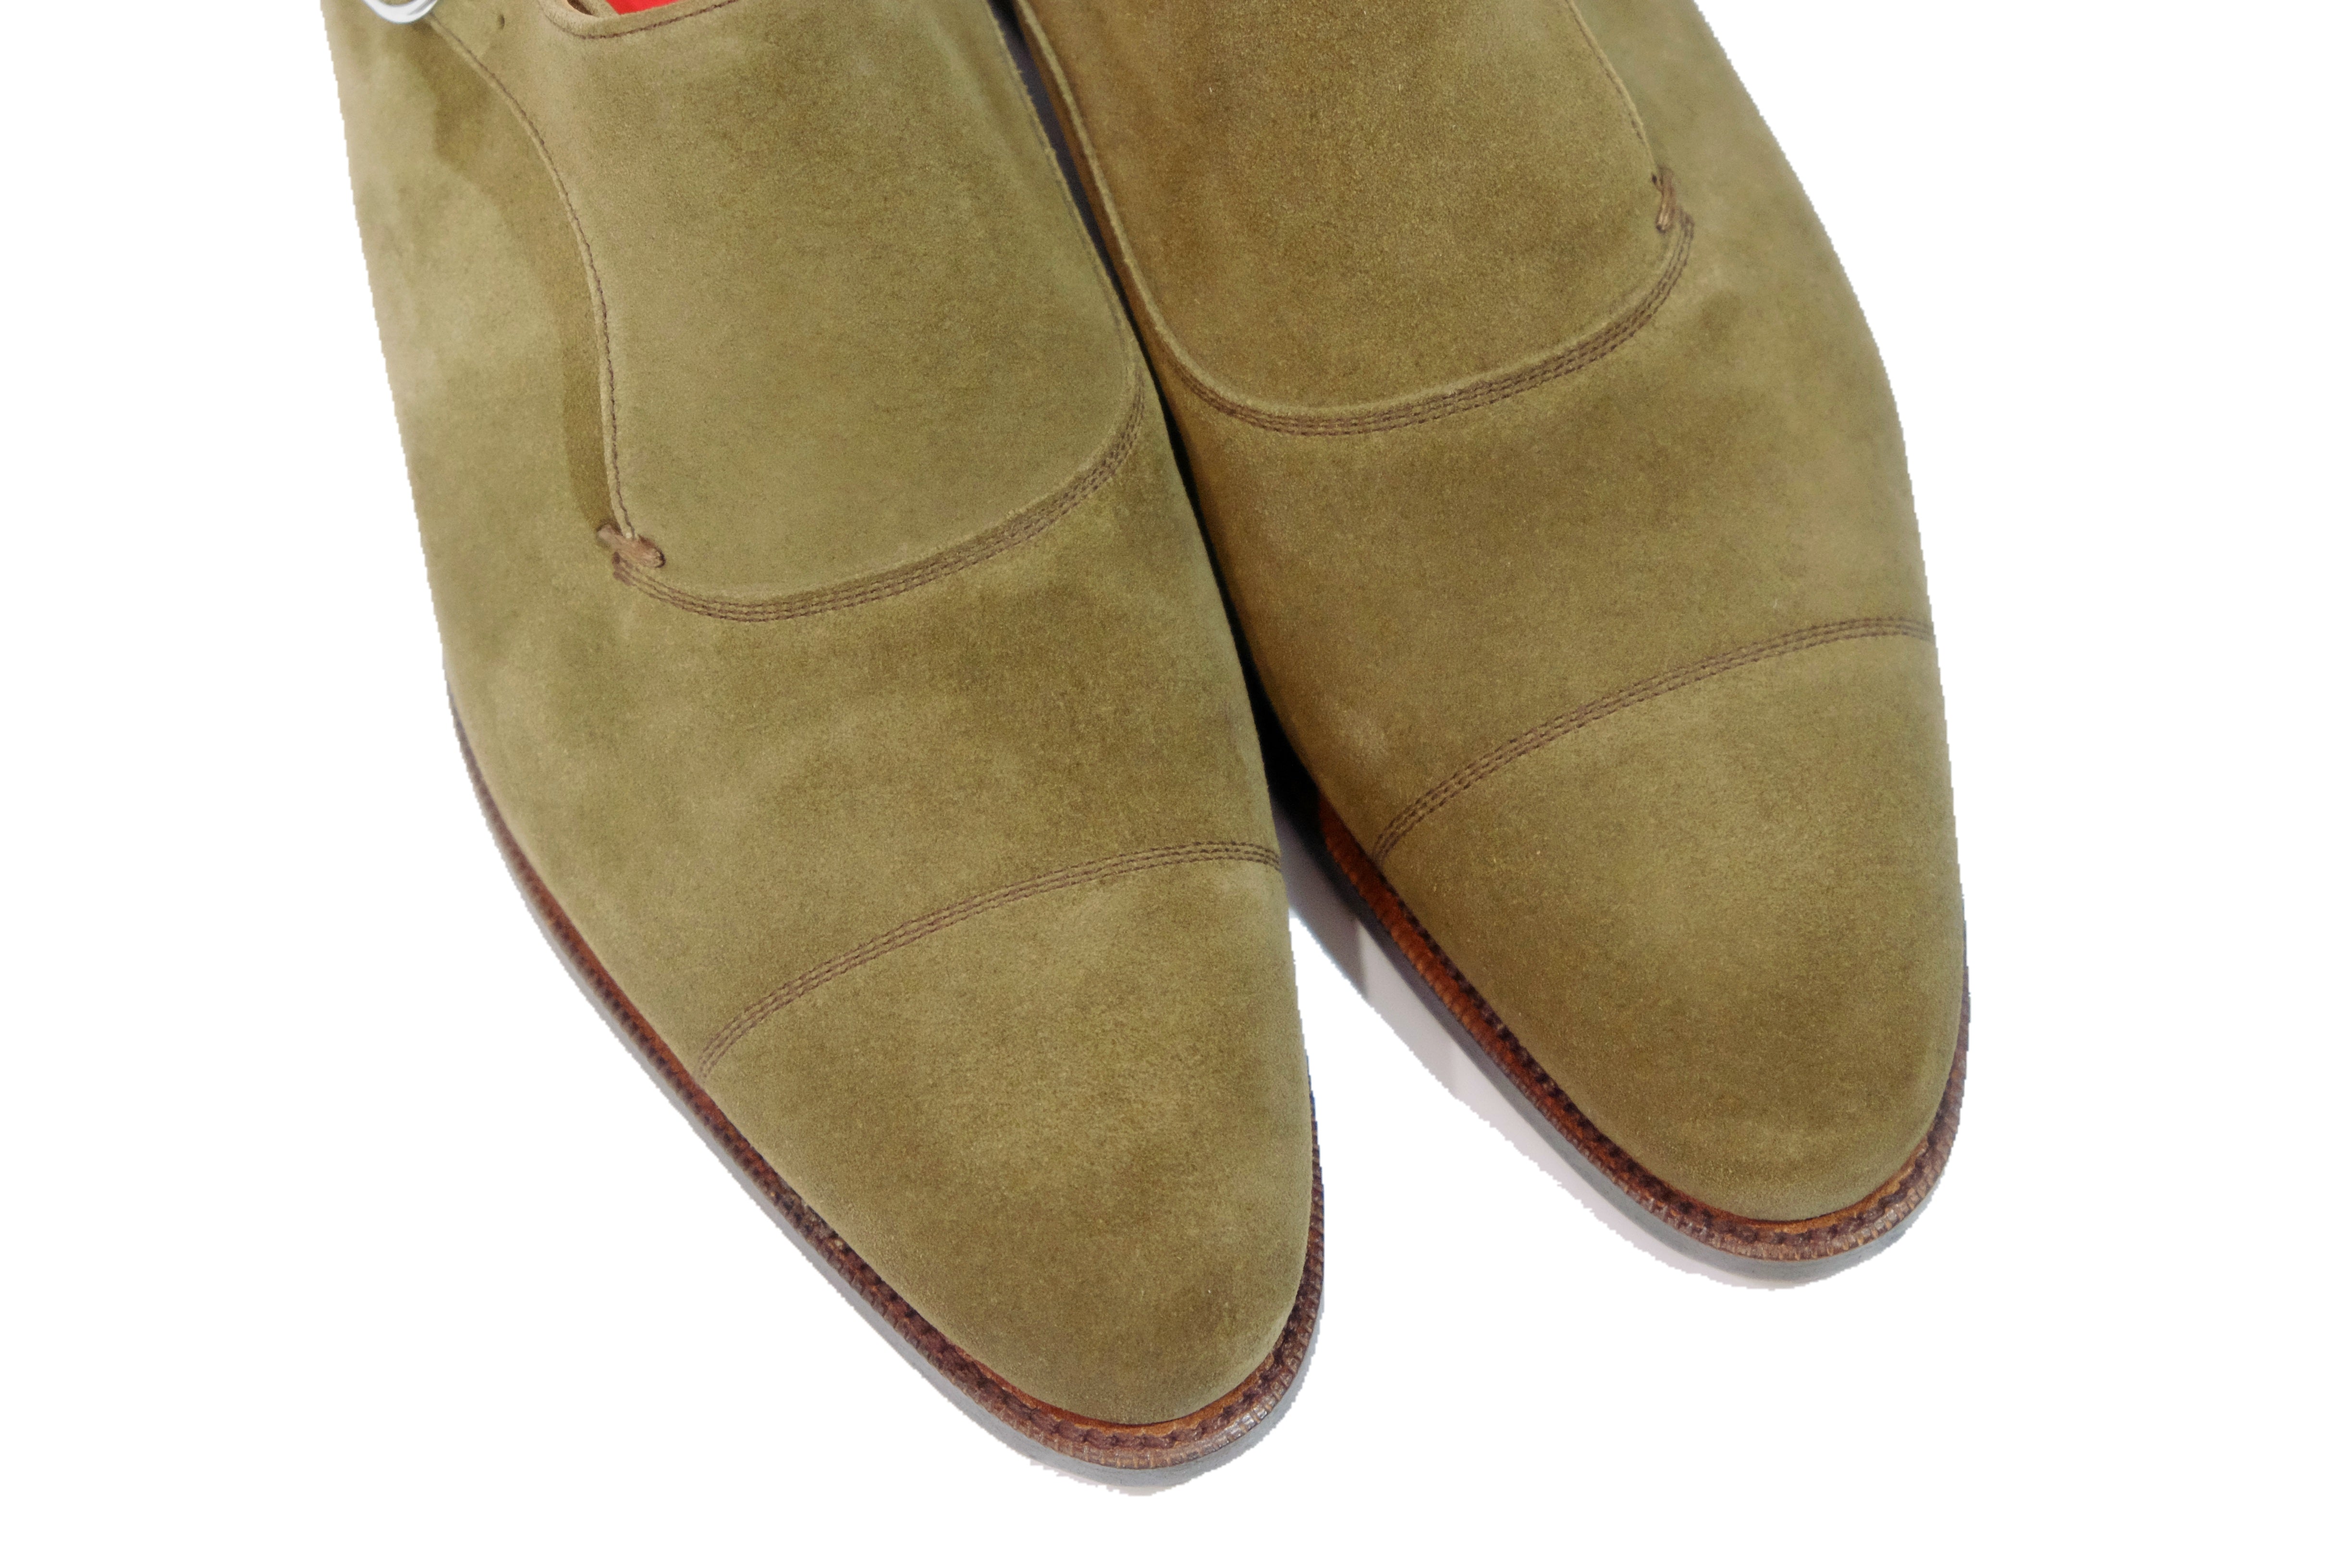 Fauntleroy - MTO - Olive Suede - NGT Last - Single Leather Sole